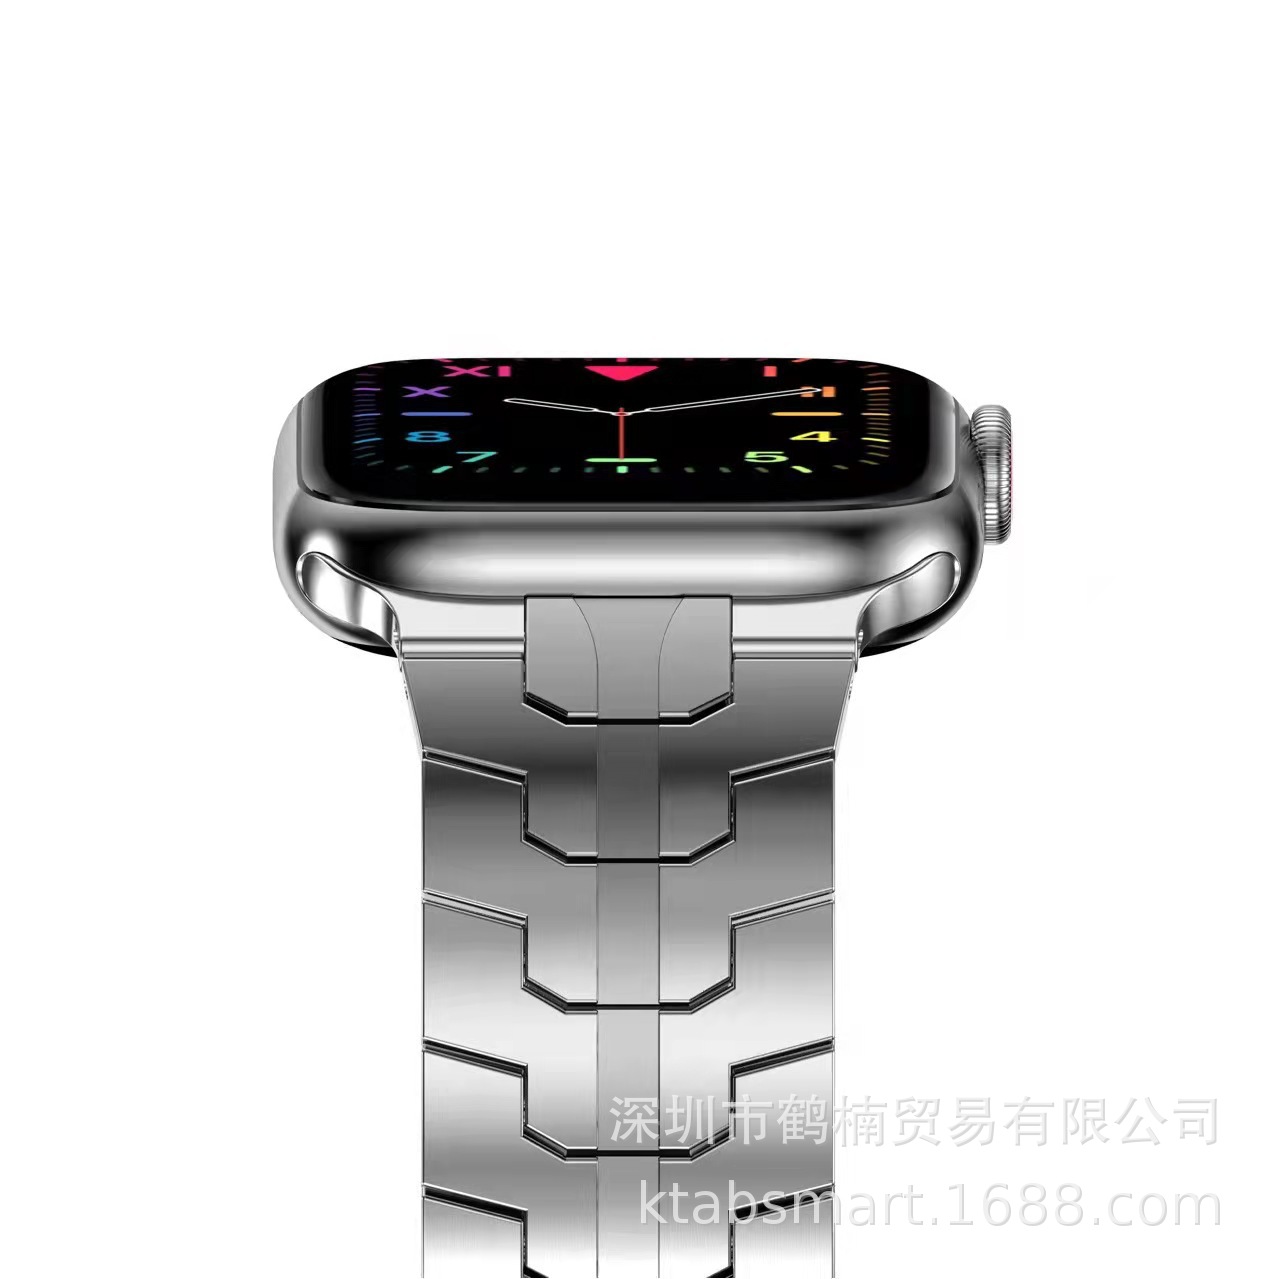 Applicable To The Trend Of Apple Watch Iwatch Strap 1-7 Generation New Siamese Iron Man Stainless Steel Metal Strap